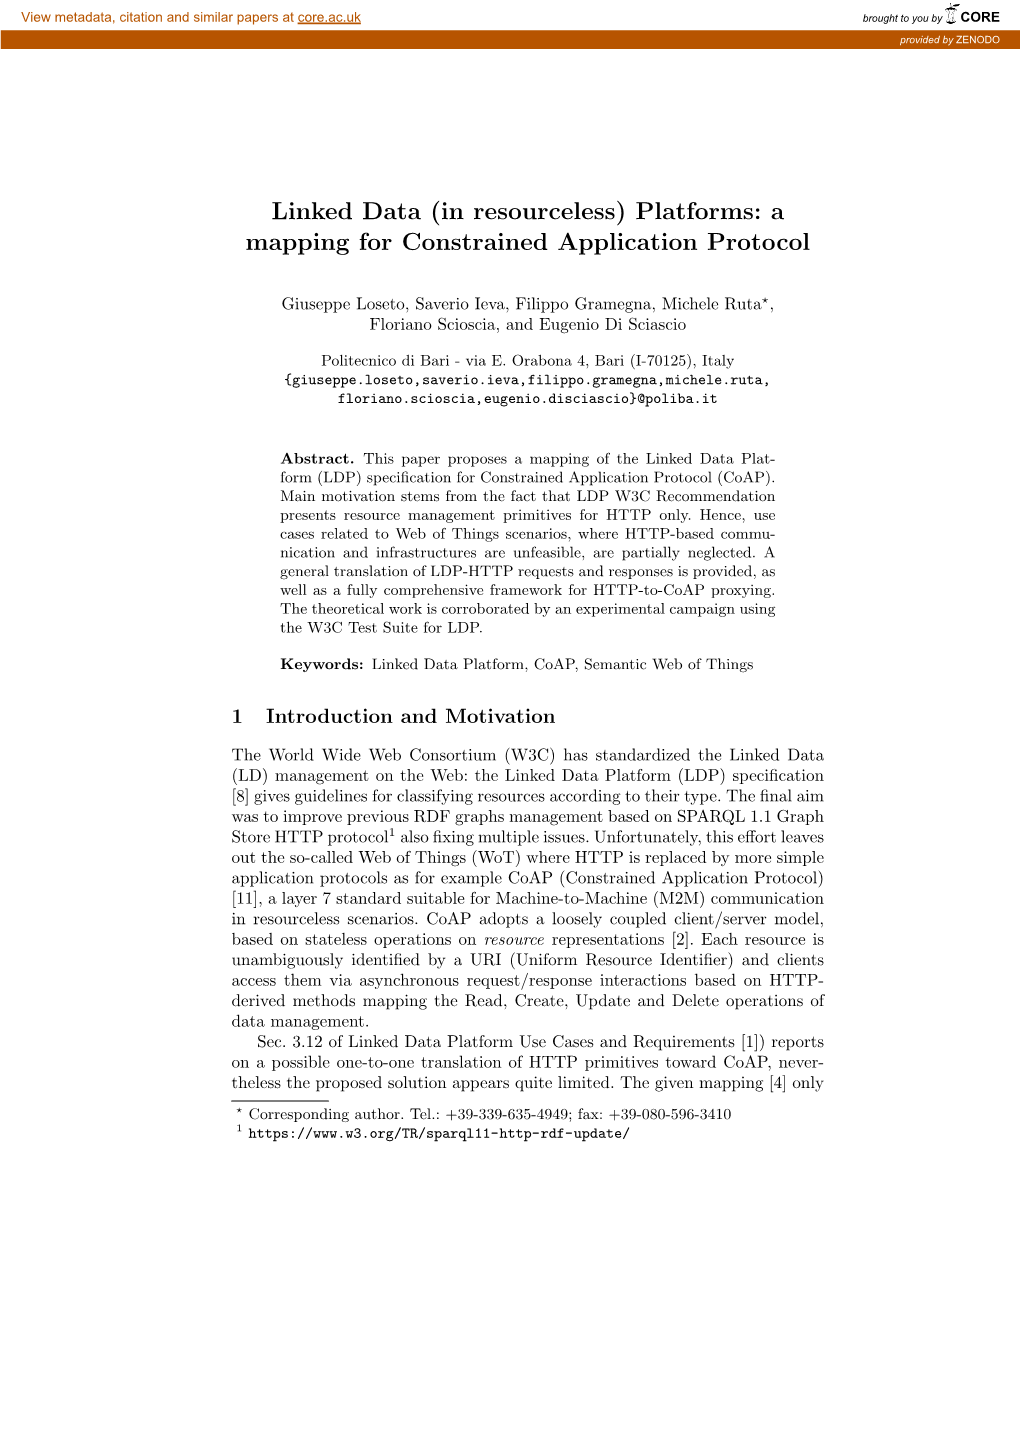 Linked Data (In Resourceless) Platforms: a Mapping for Constrained Application Protocol